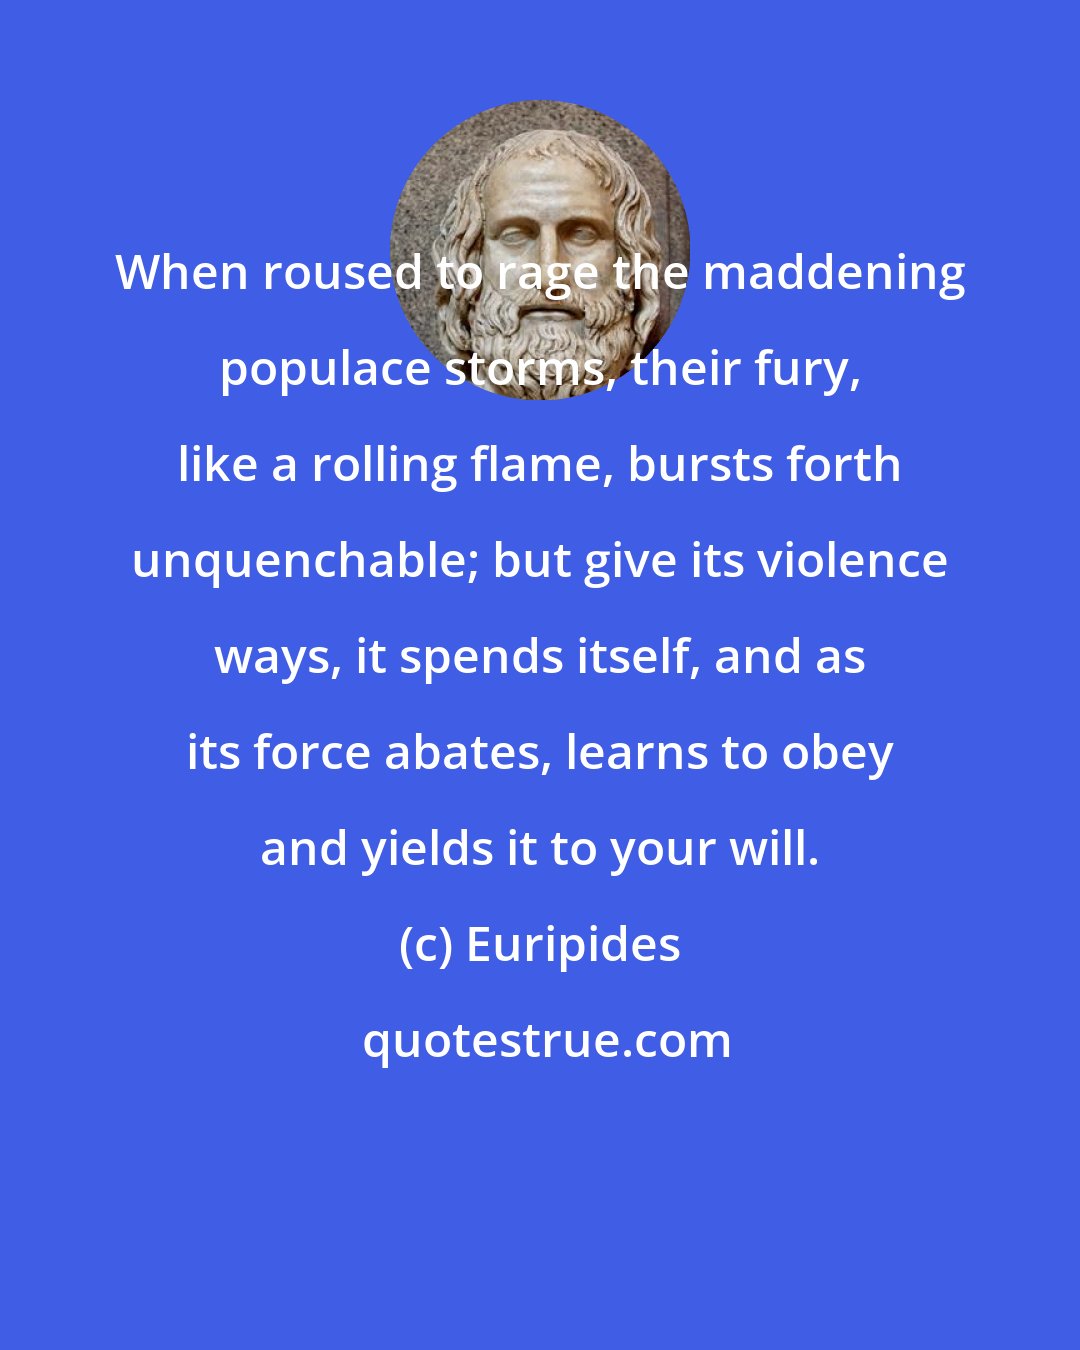 Euripides: When roused to rage the maddening populace storms, their fury, like a rolling flame, bursts forth unquenchable; but give its violence ways, it spends itself, and as its force abates, learns to obey and yields it to your will.